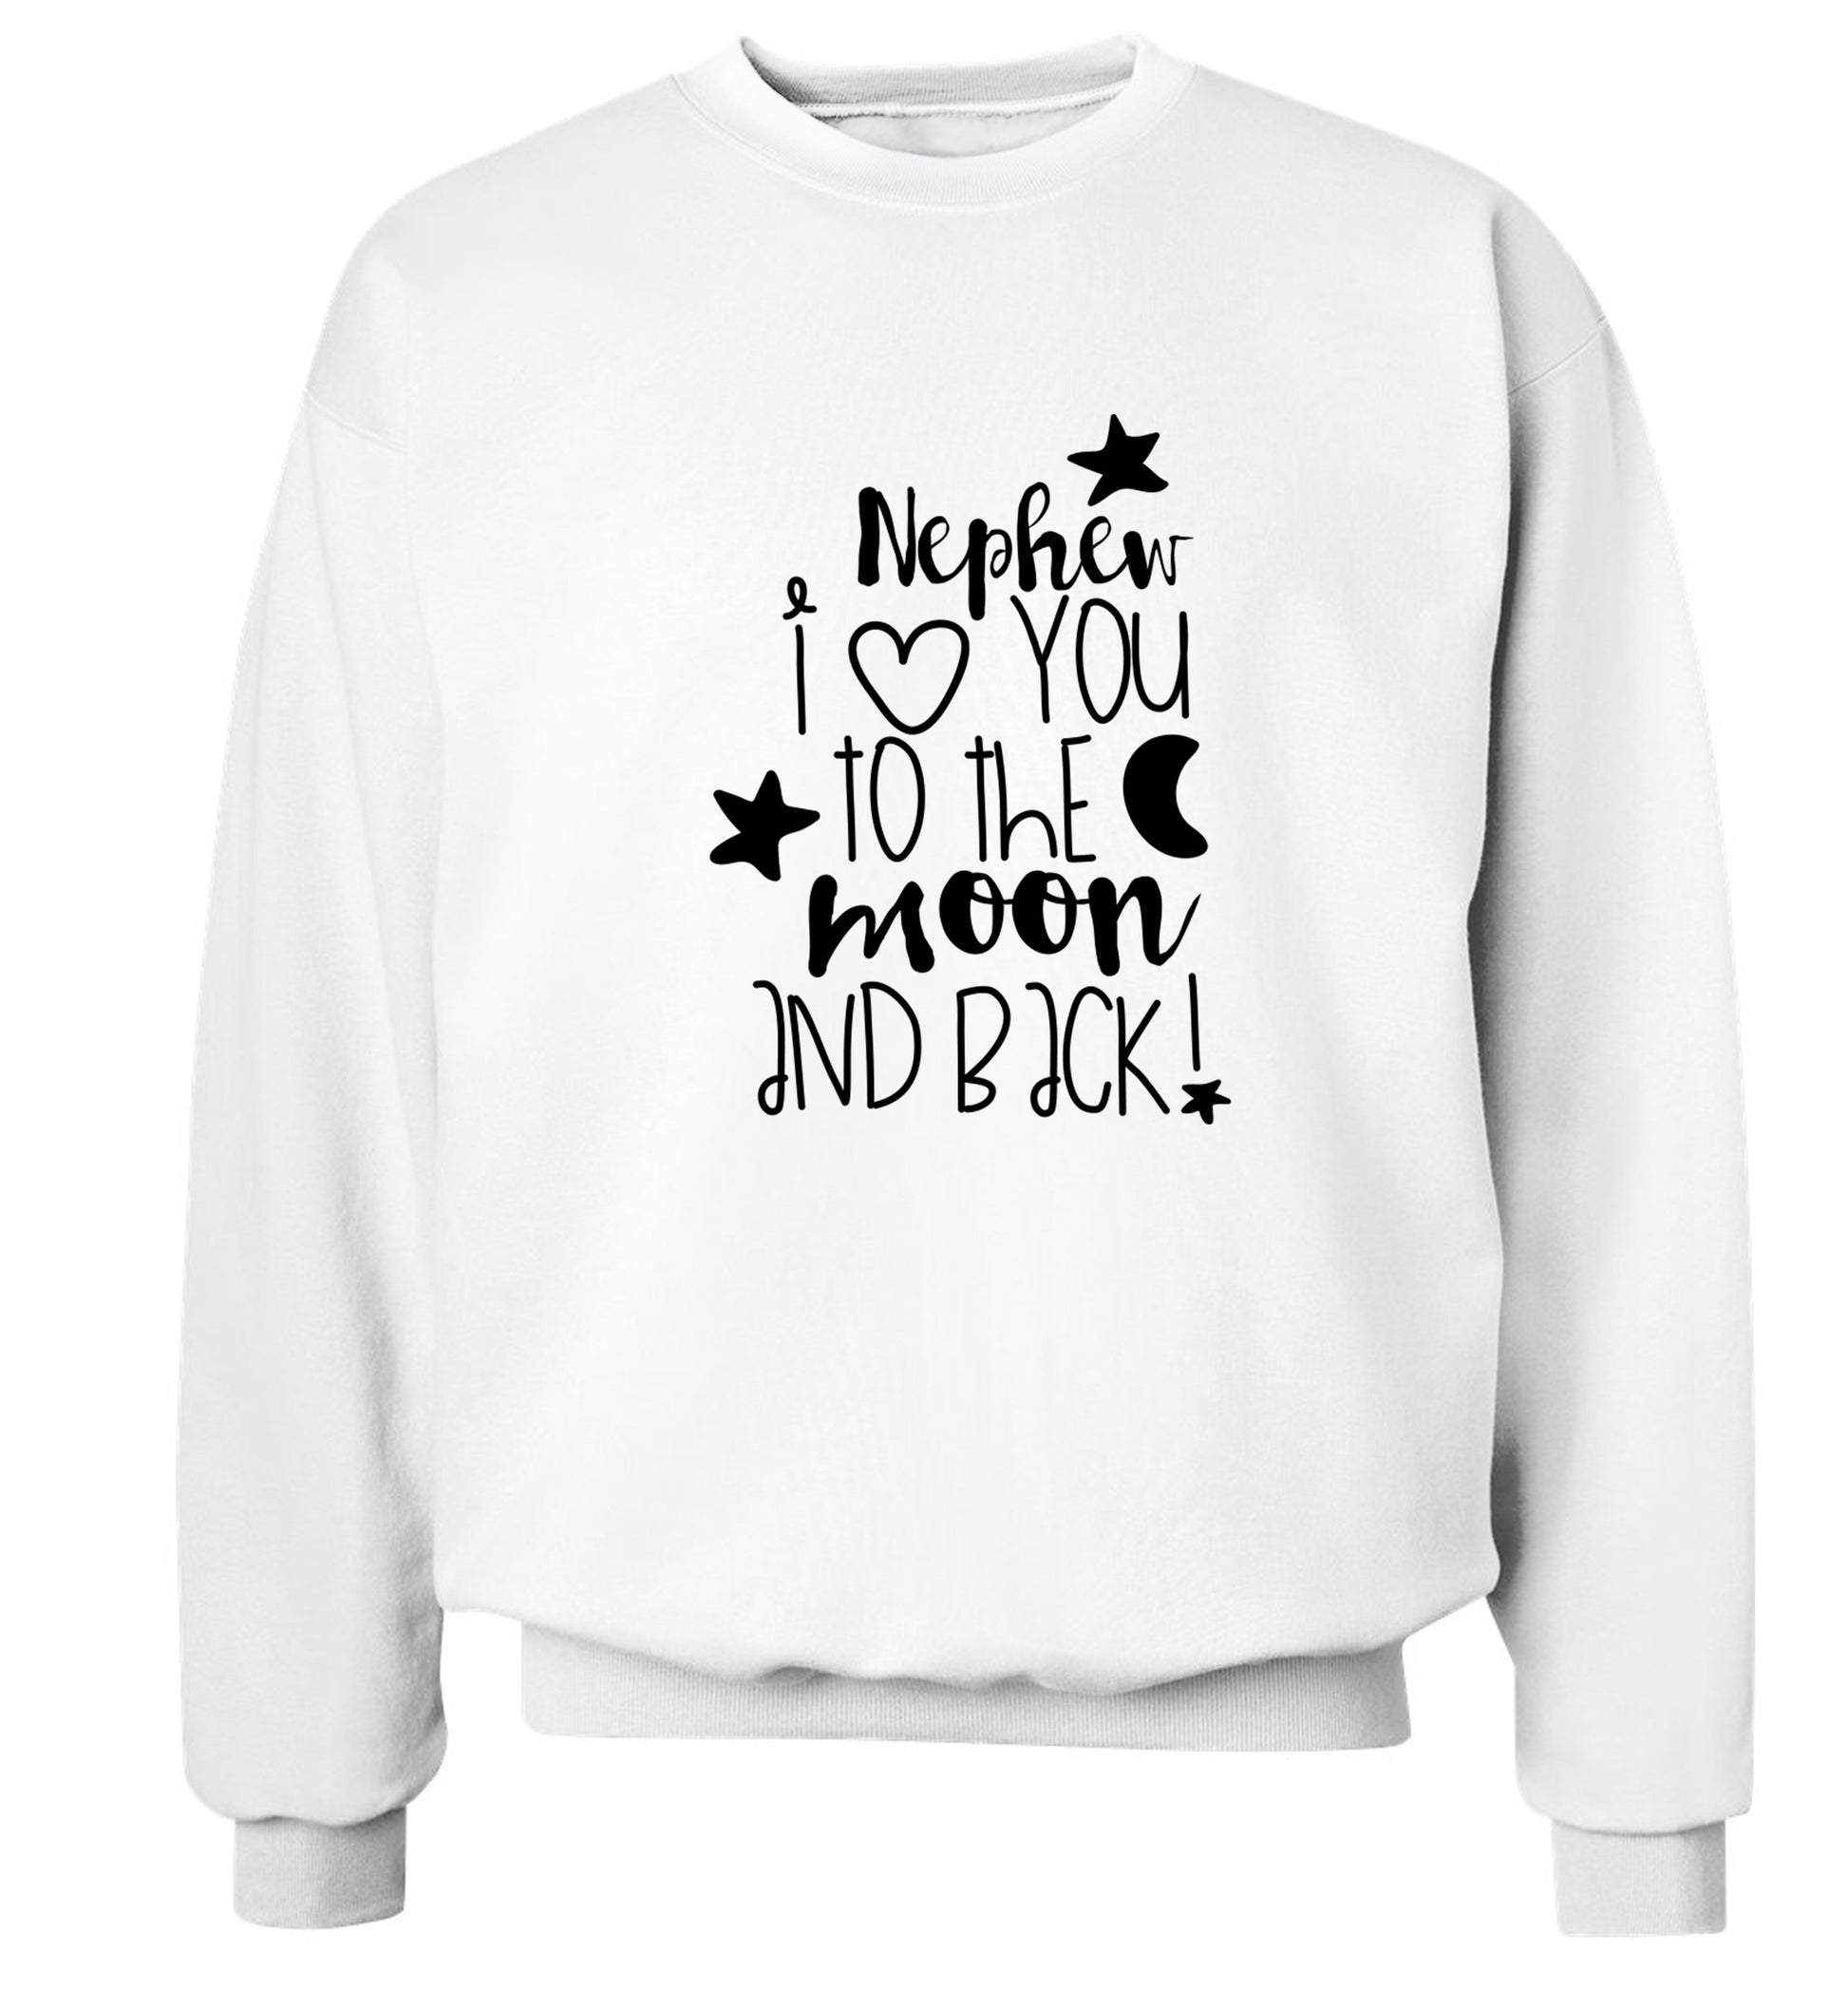 Nephew I love you to the moon and back Adult's unisex white  sweater 2XL